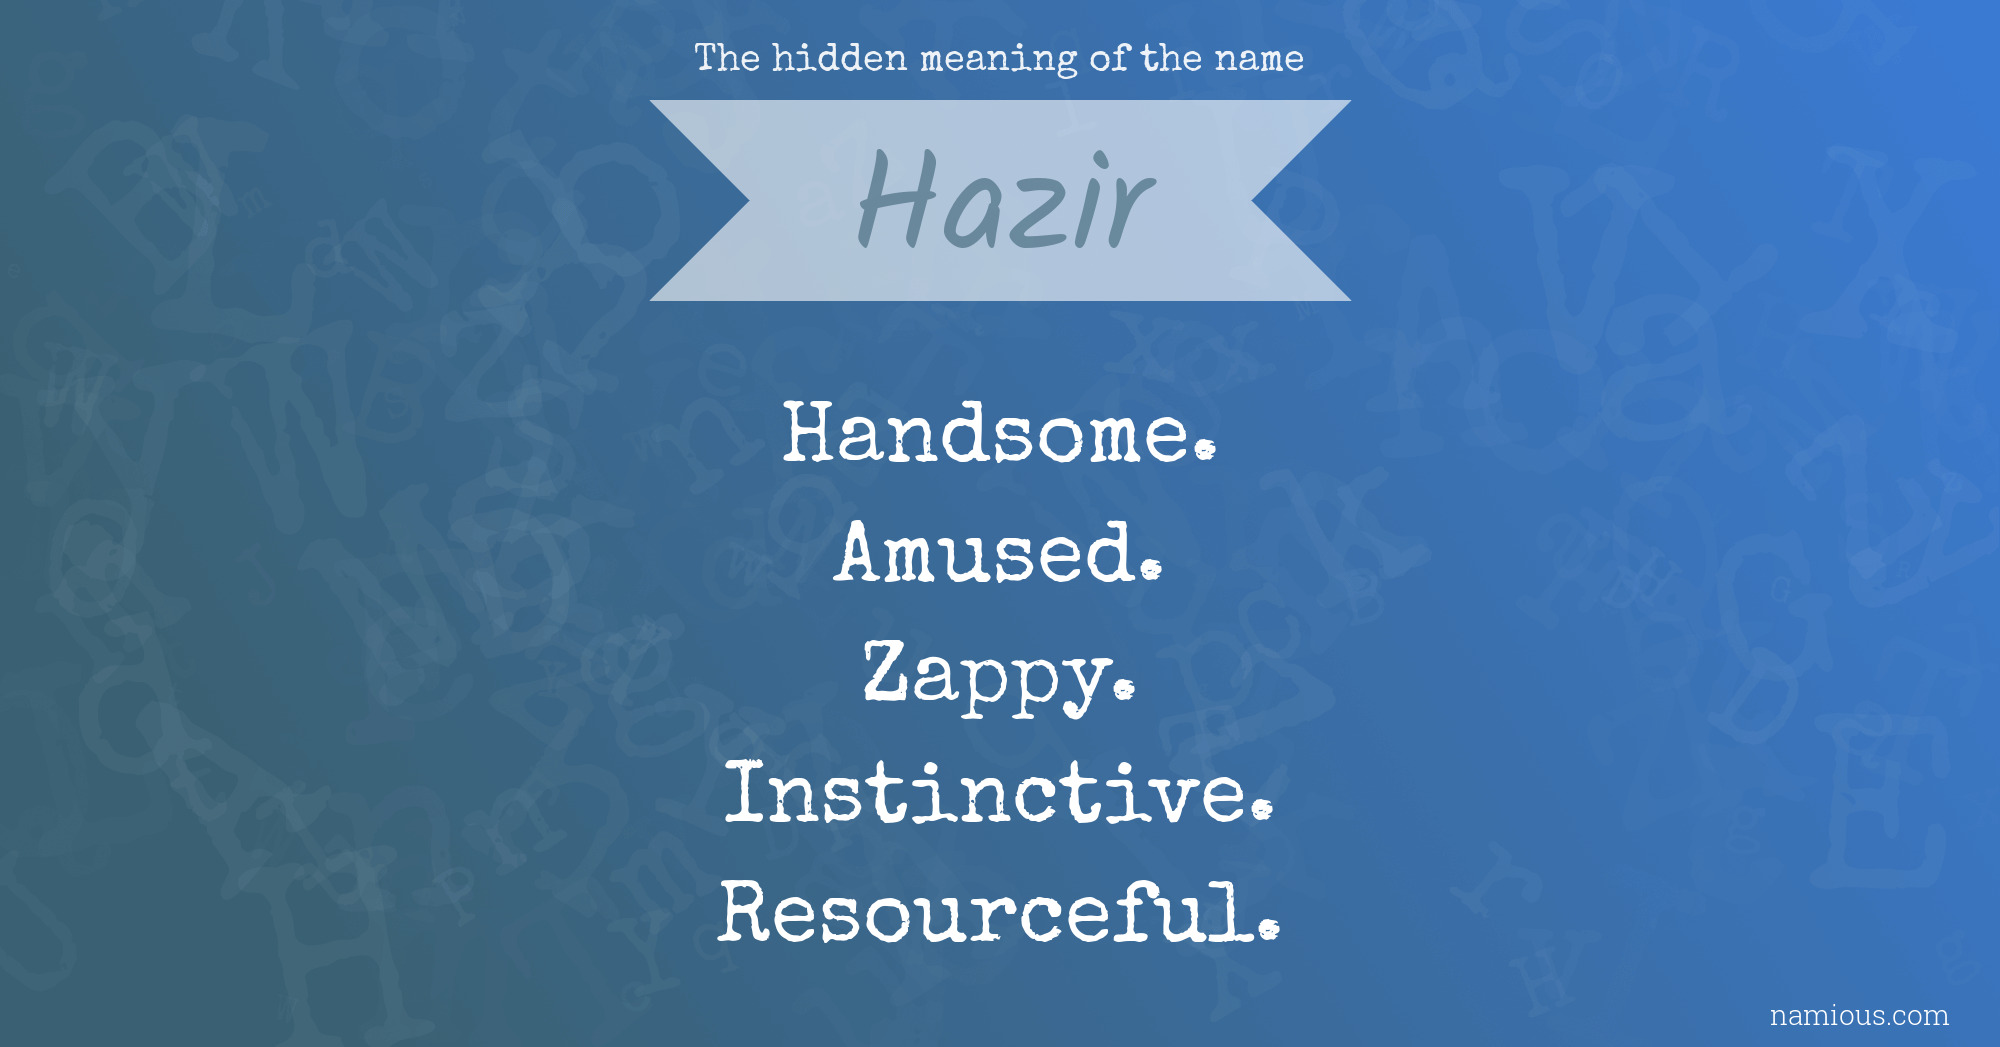 The hidden meaning of the name Hazir